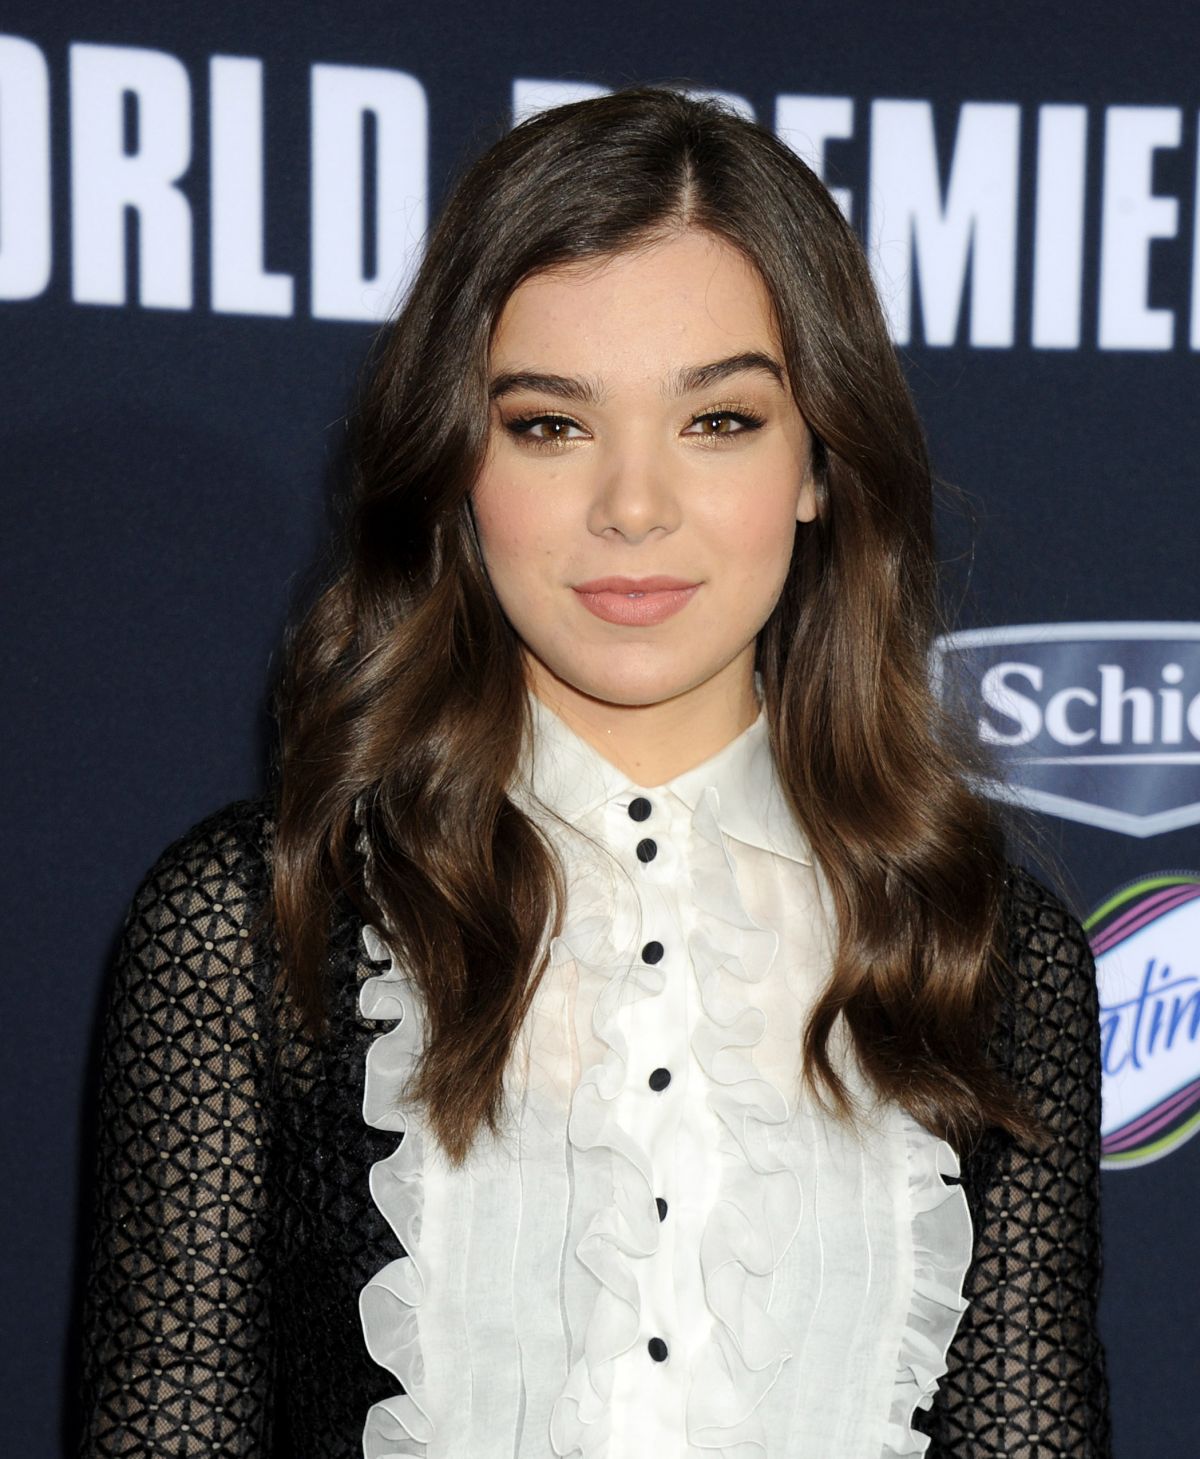 HAILEE STEINFELD at Pitch Perfect 2 Premiere in Los Angeles – HawtCelebs